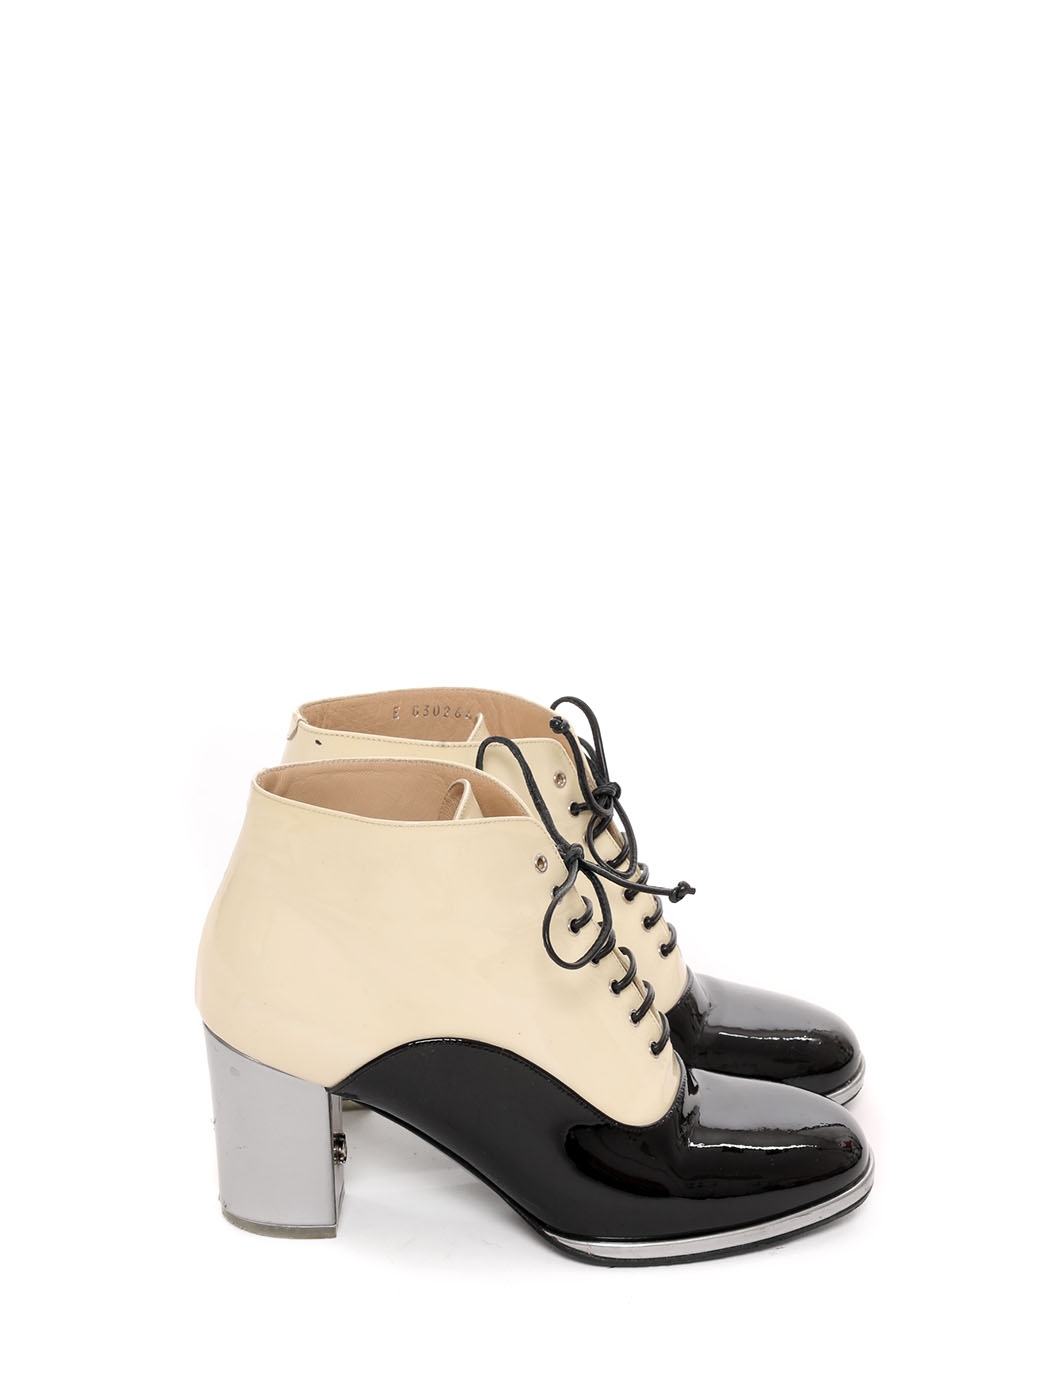 Chanel White Leather Cap Toe Ankle Boots